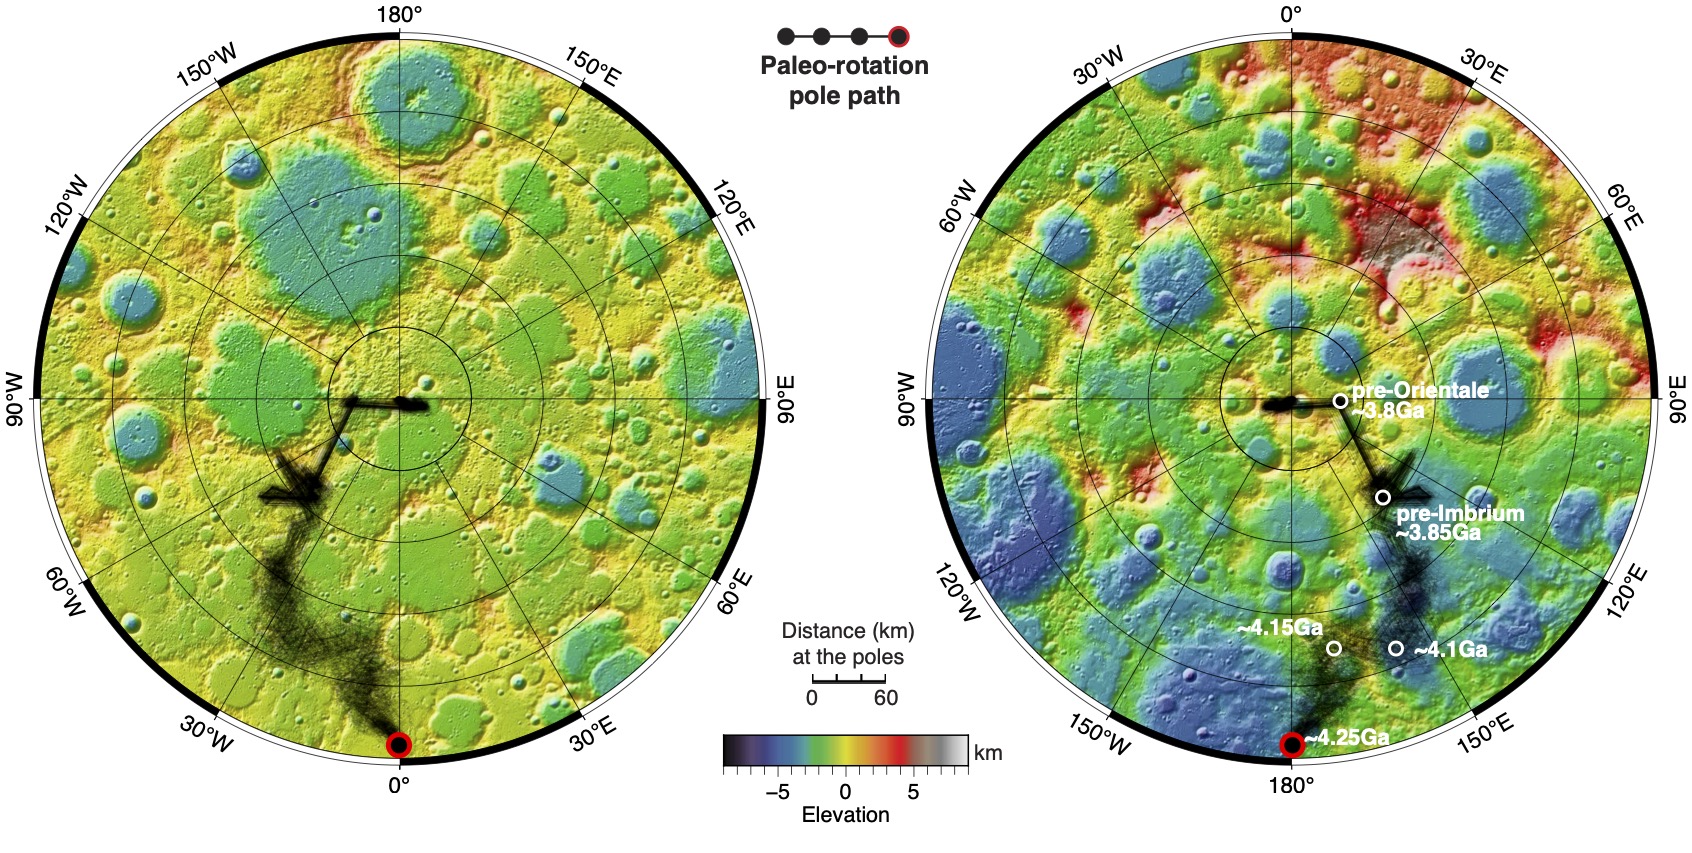 UMBC’s Viswanathan uses the Moon’s craters to track its shifting poles over 4.25 billion years